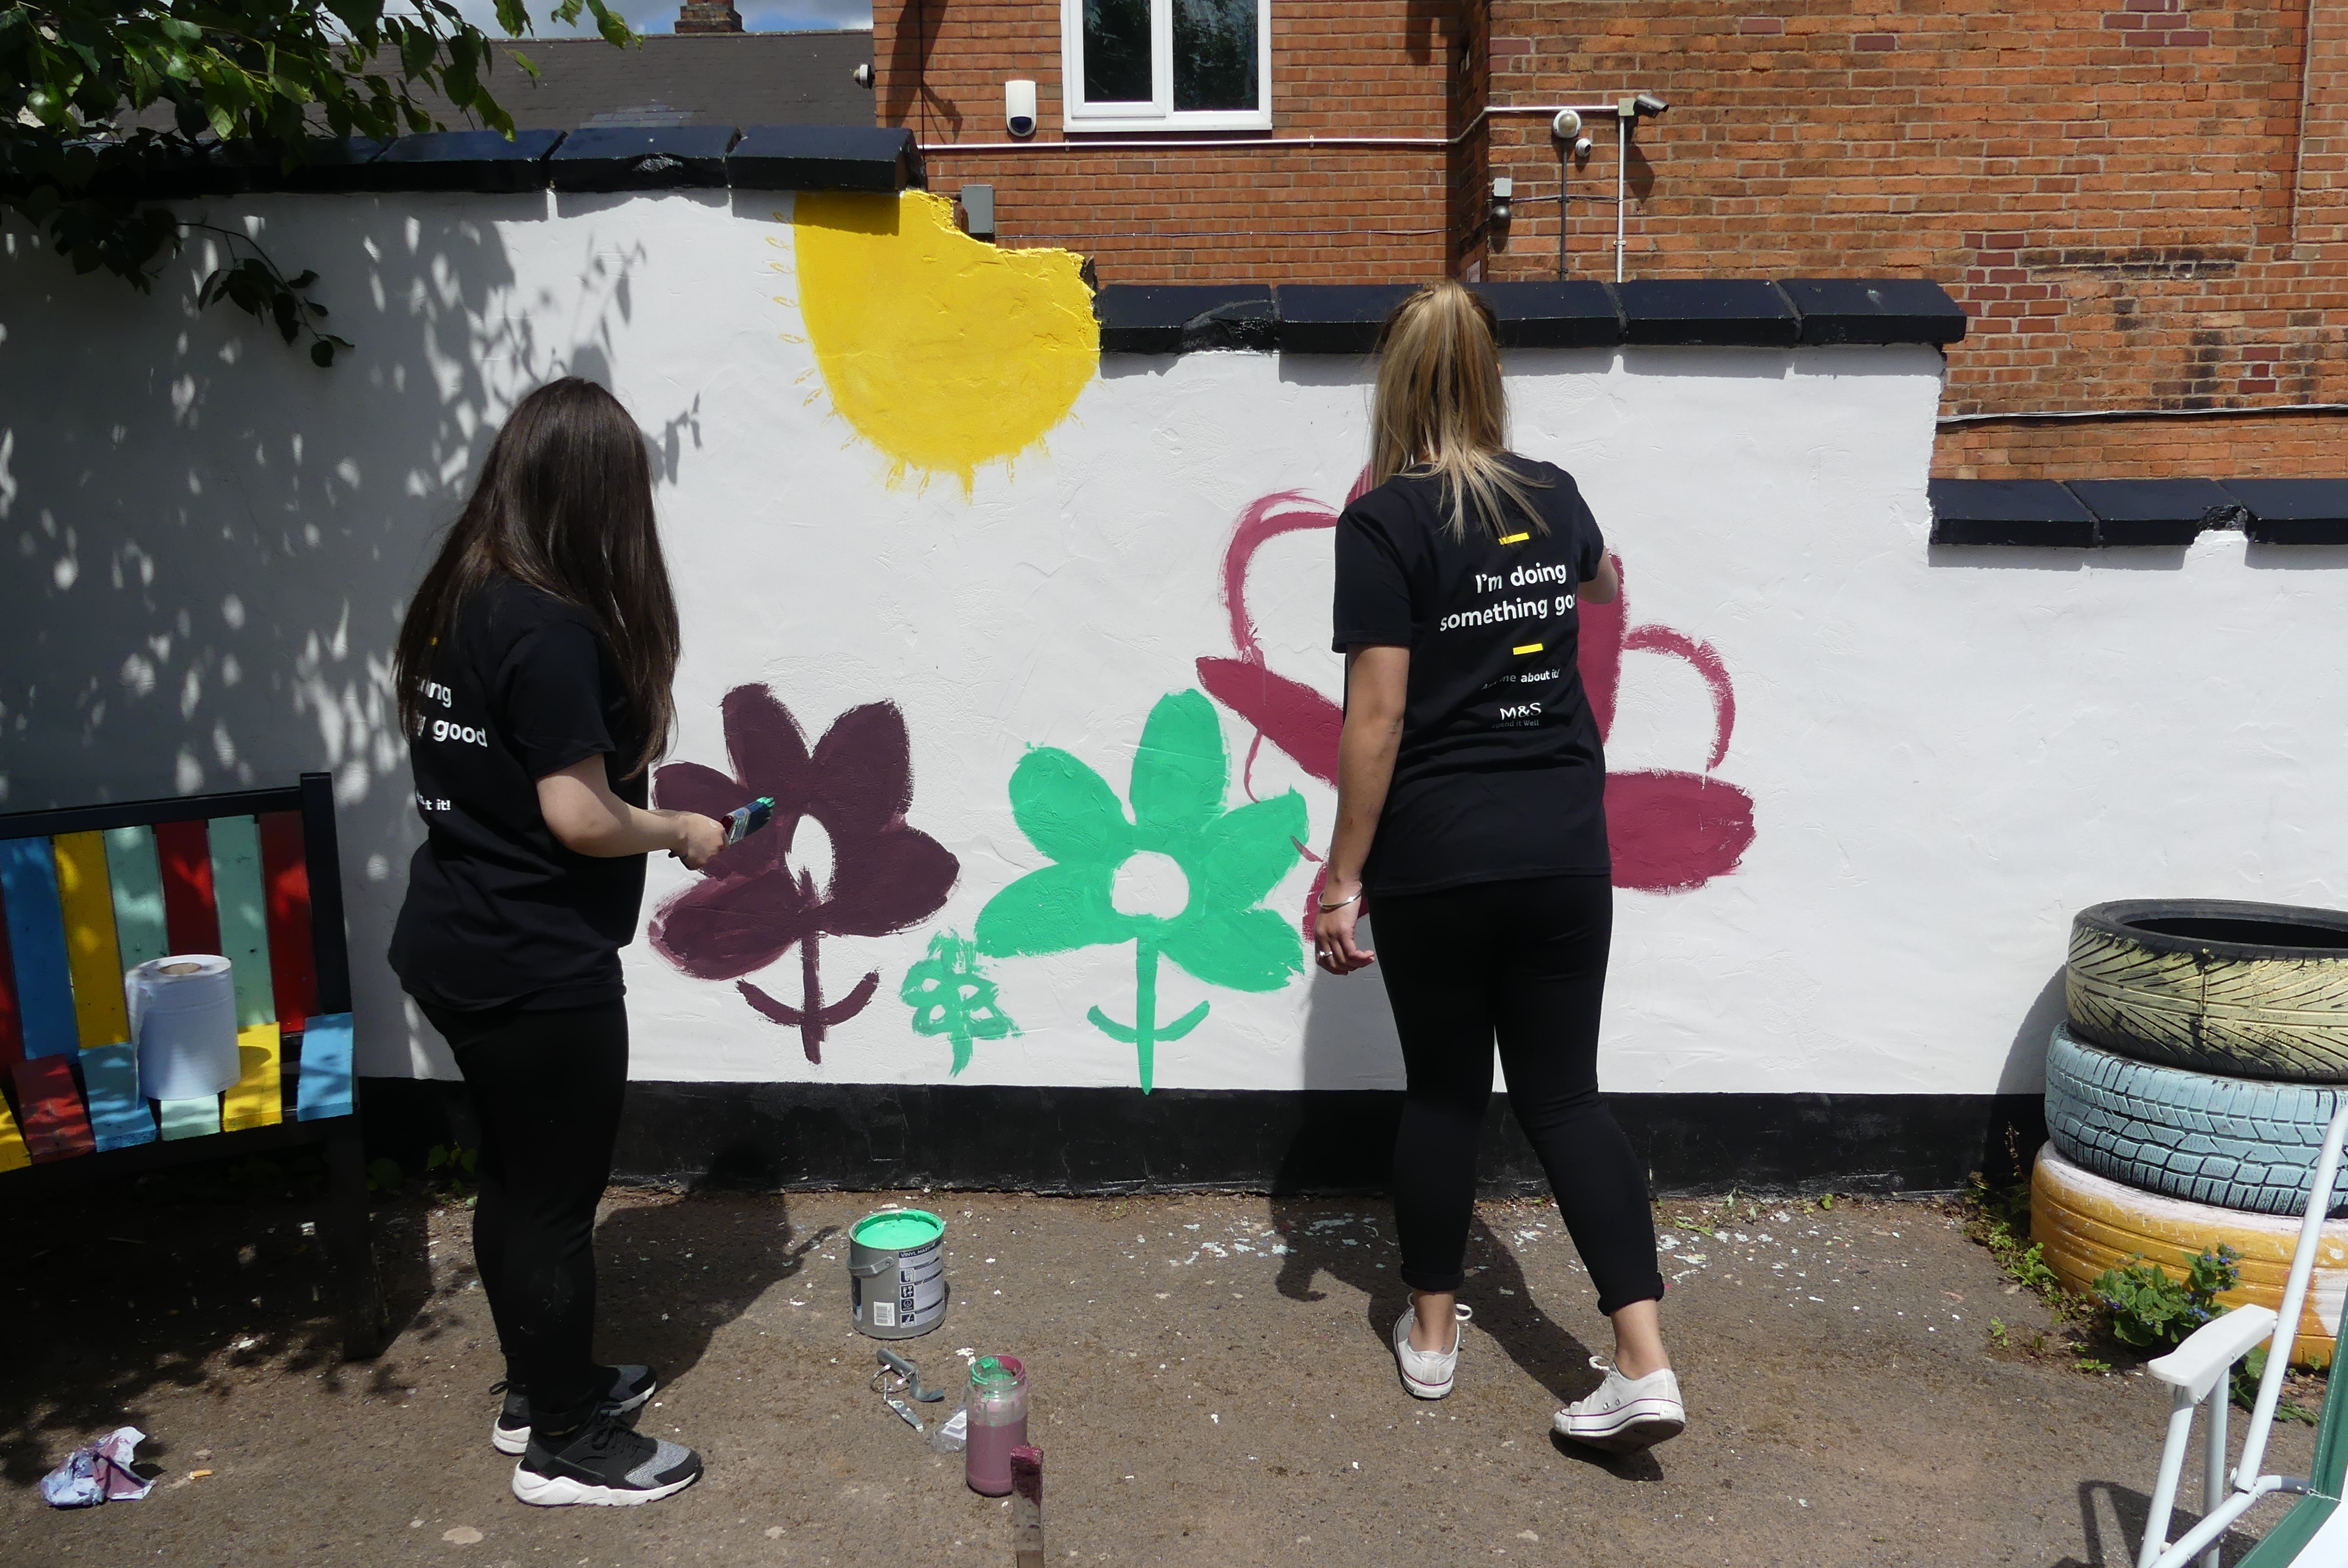 Volunteers painting a community mural using cheap and recycled paint from Community RePaint Birmingham. The mural is of flowers and insects on a white background.